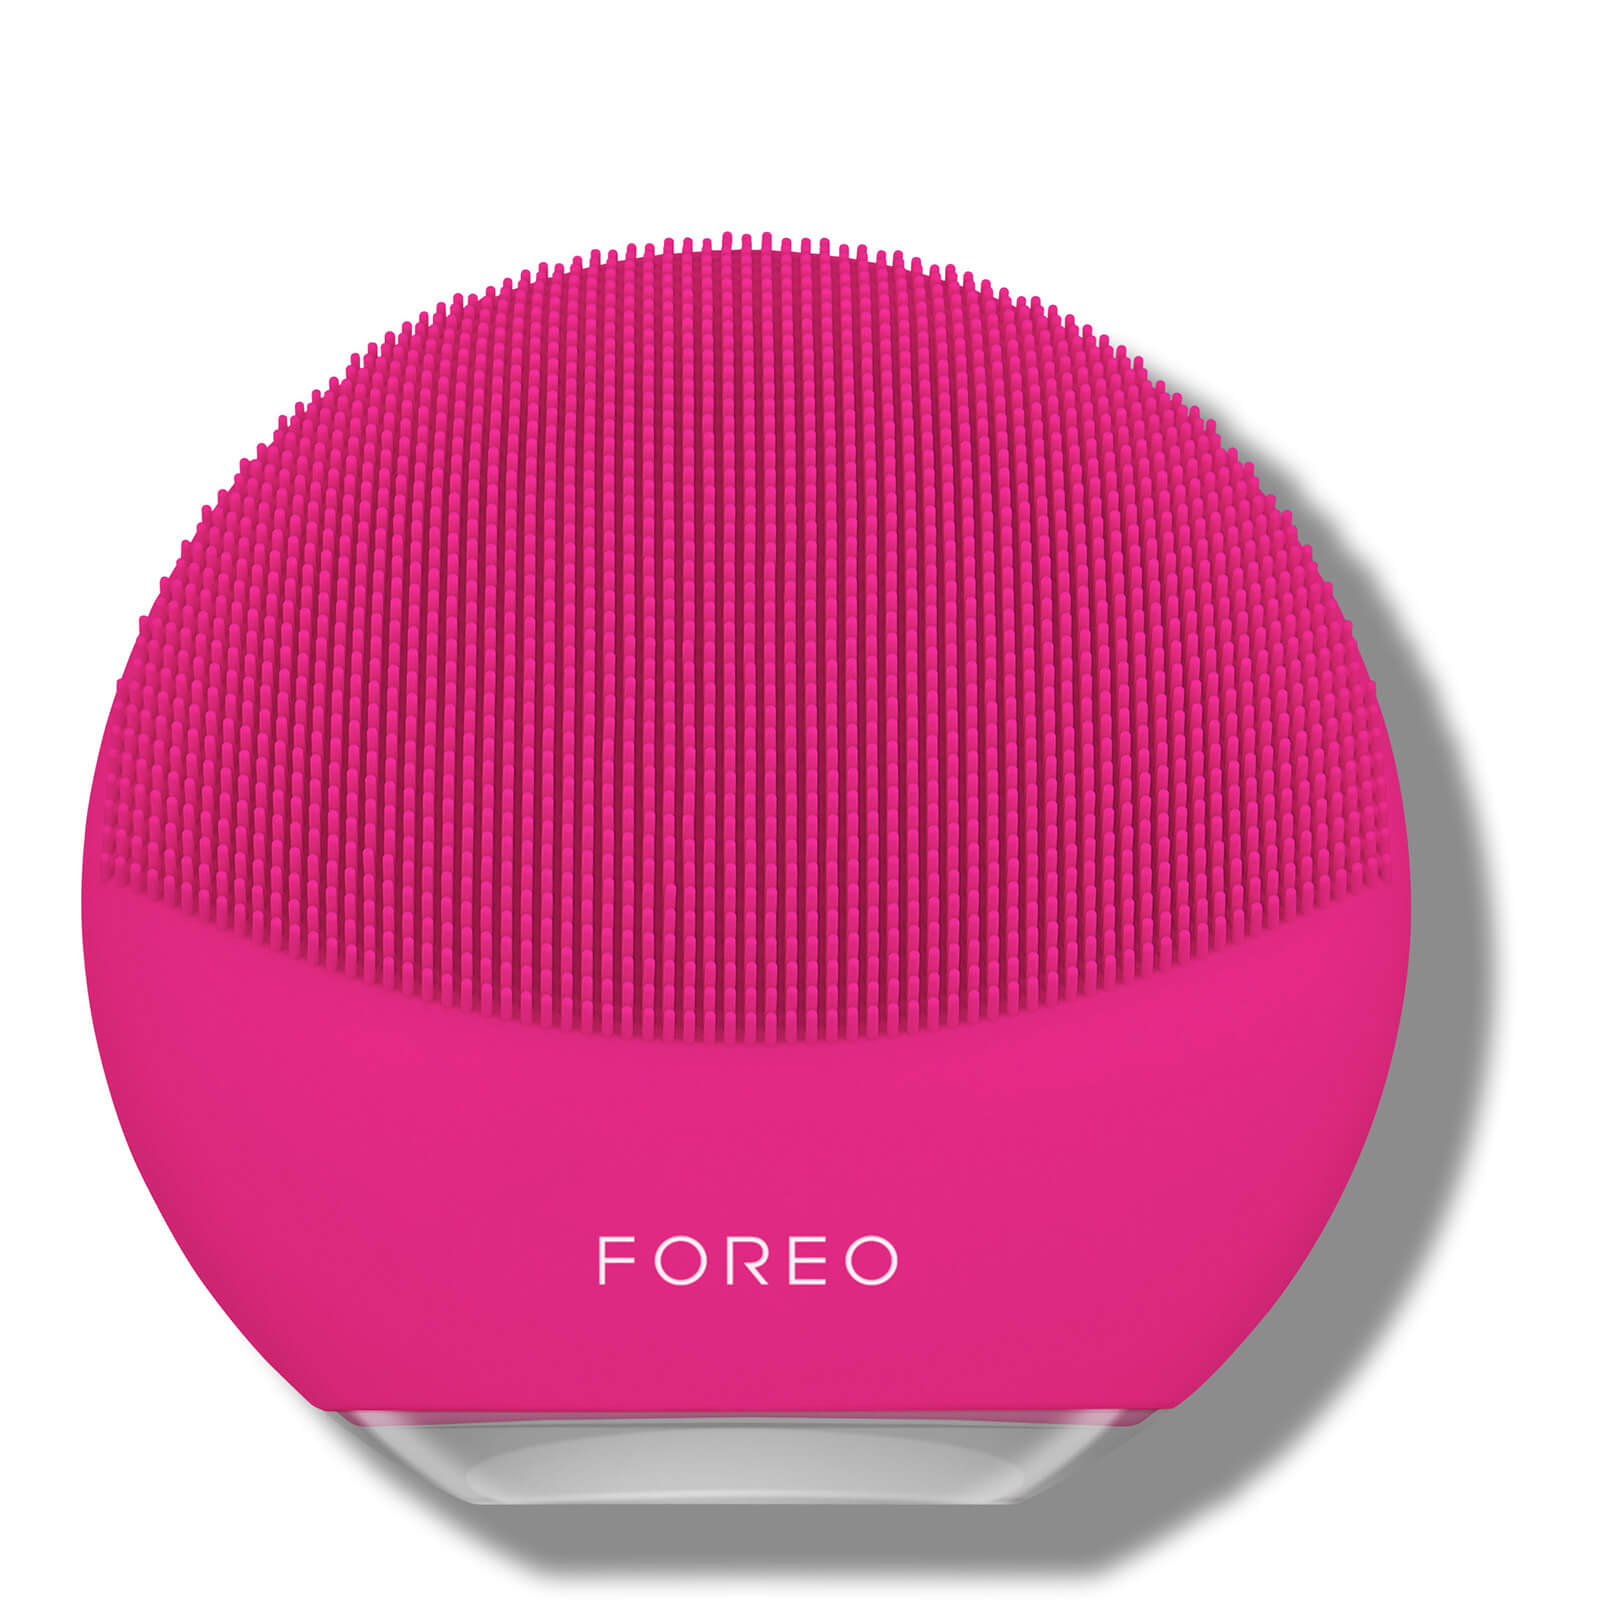 FOREO LUNA Mini 3 Dual-Sided Face Brush for All Skin Types (Various Shades) - 1 Fuchsia